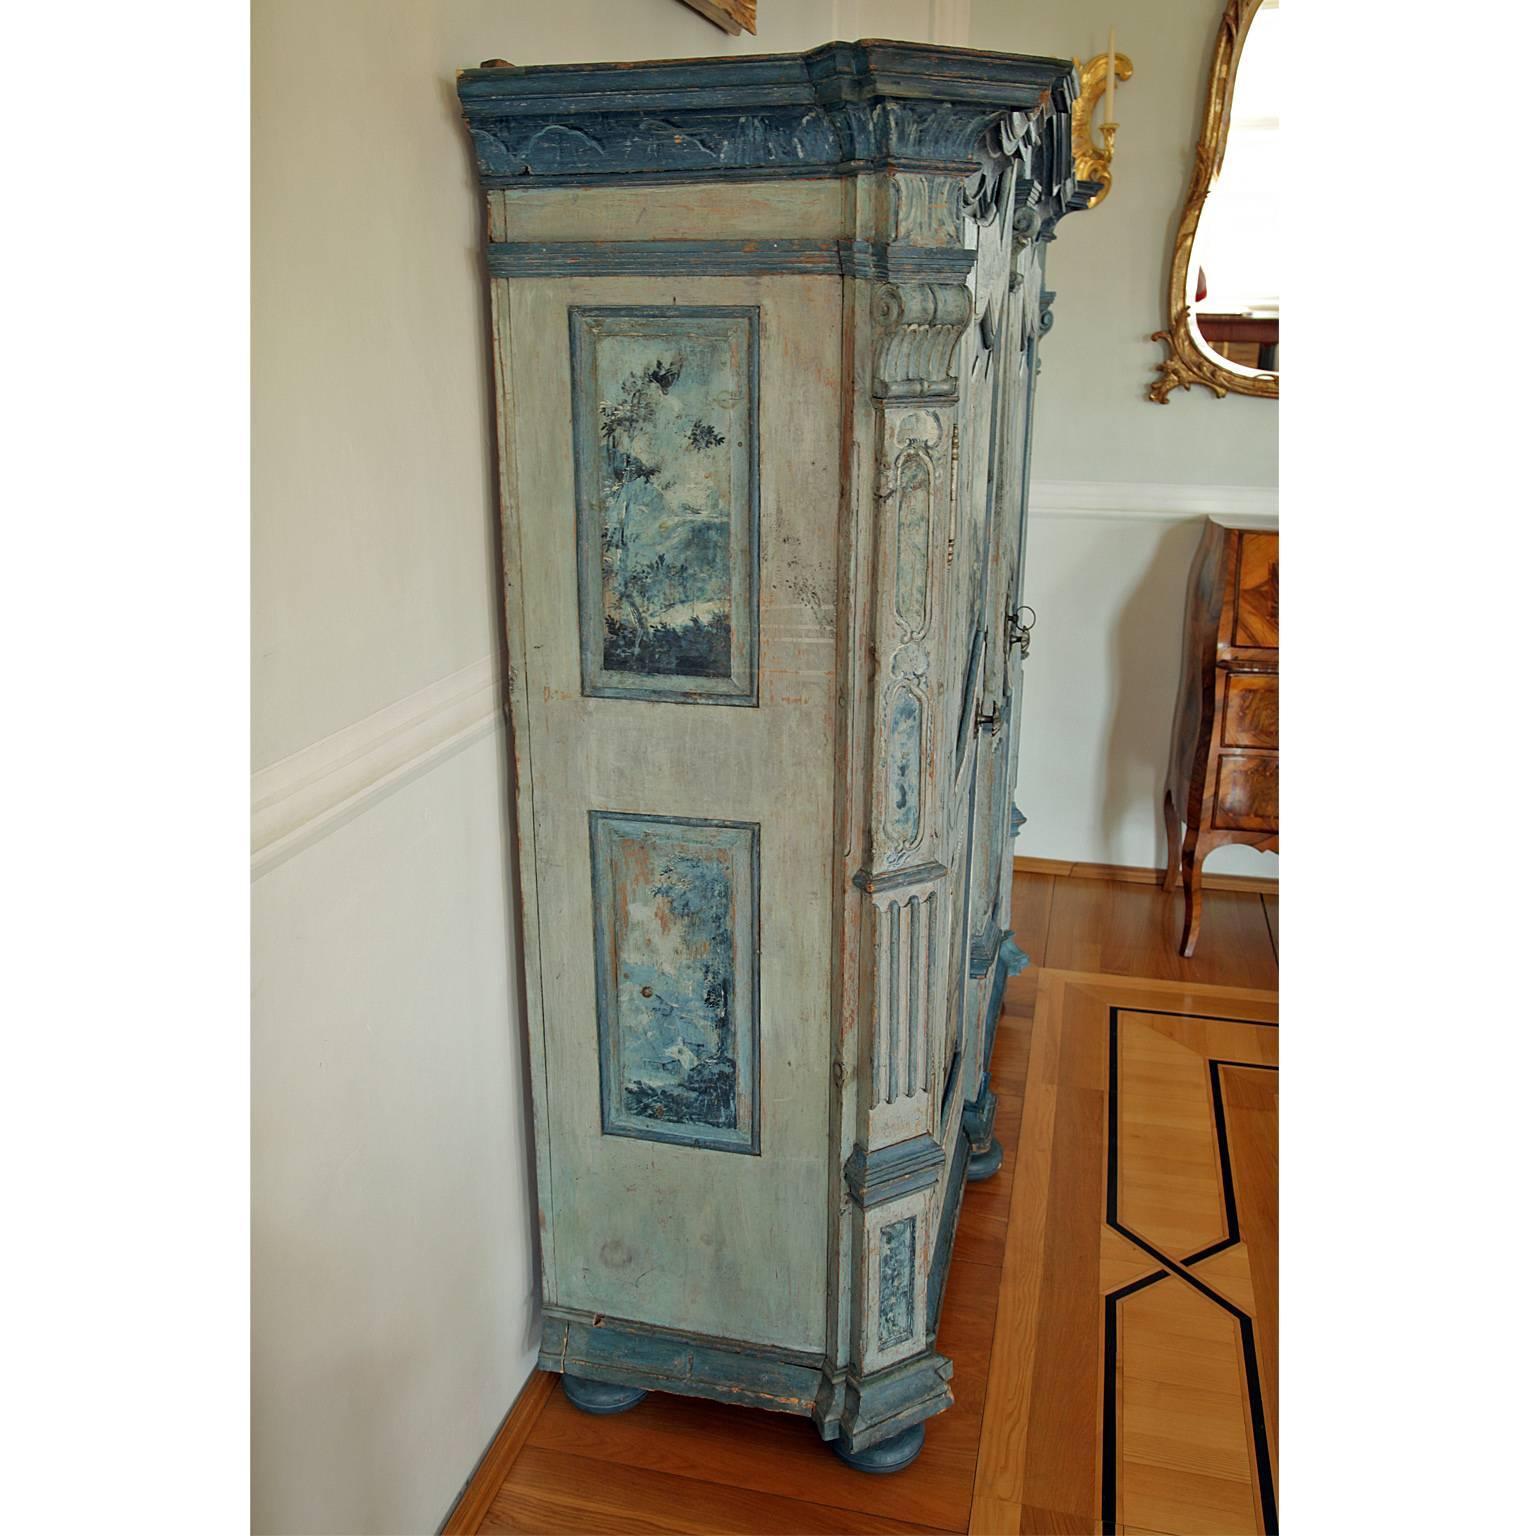 Baroque Cabinet on ball feet with two doors and a serpentine cornice. The doors and side panels have two fillings each. These are all decorated with camaieu scenes attributed to Gaspare Diziani (1712-1769). The slanted corners and the central